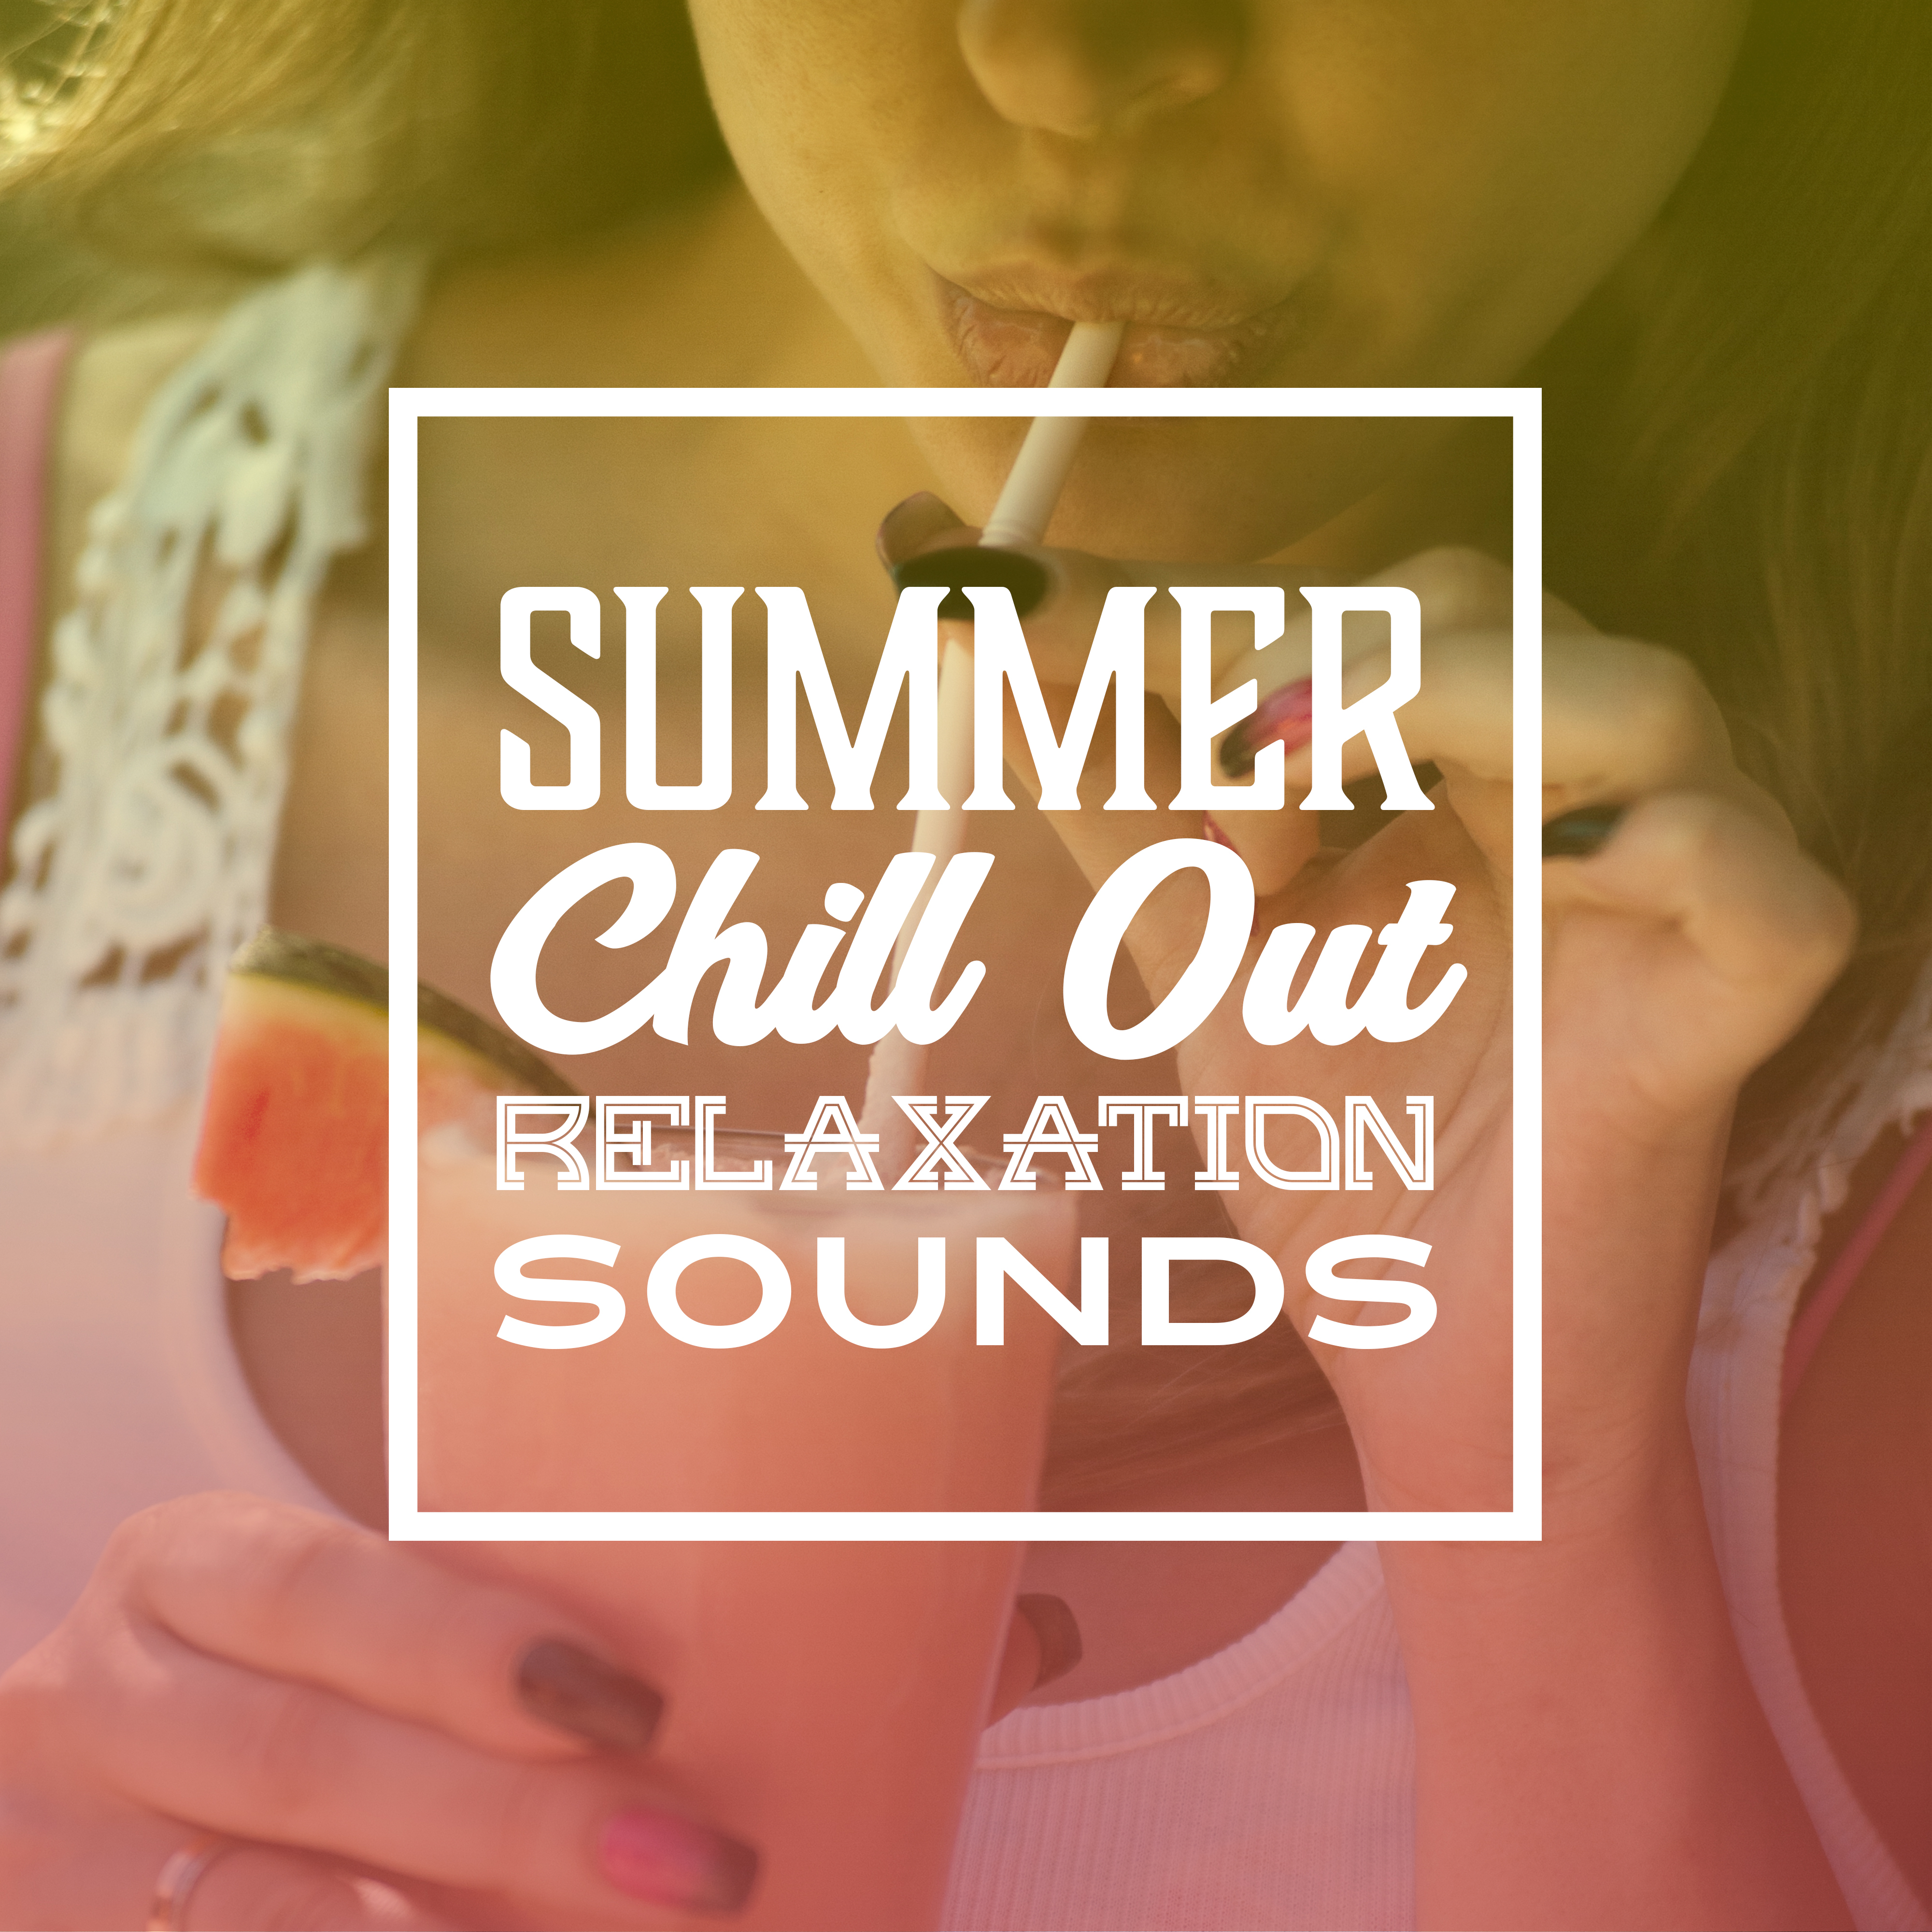 Summer Chill Out Relaxation Sounds  Soft Chill Out Melodies, Rest a Bit, Tropical Island Music, Sounds for Relaxation